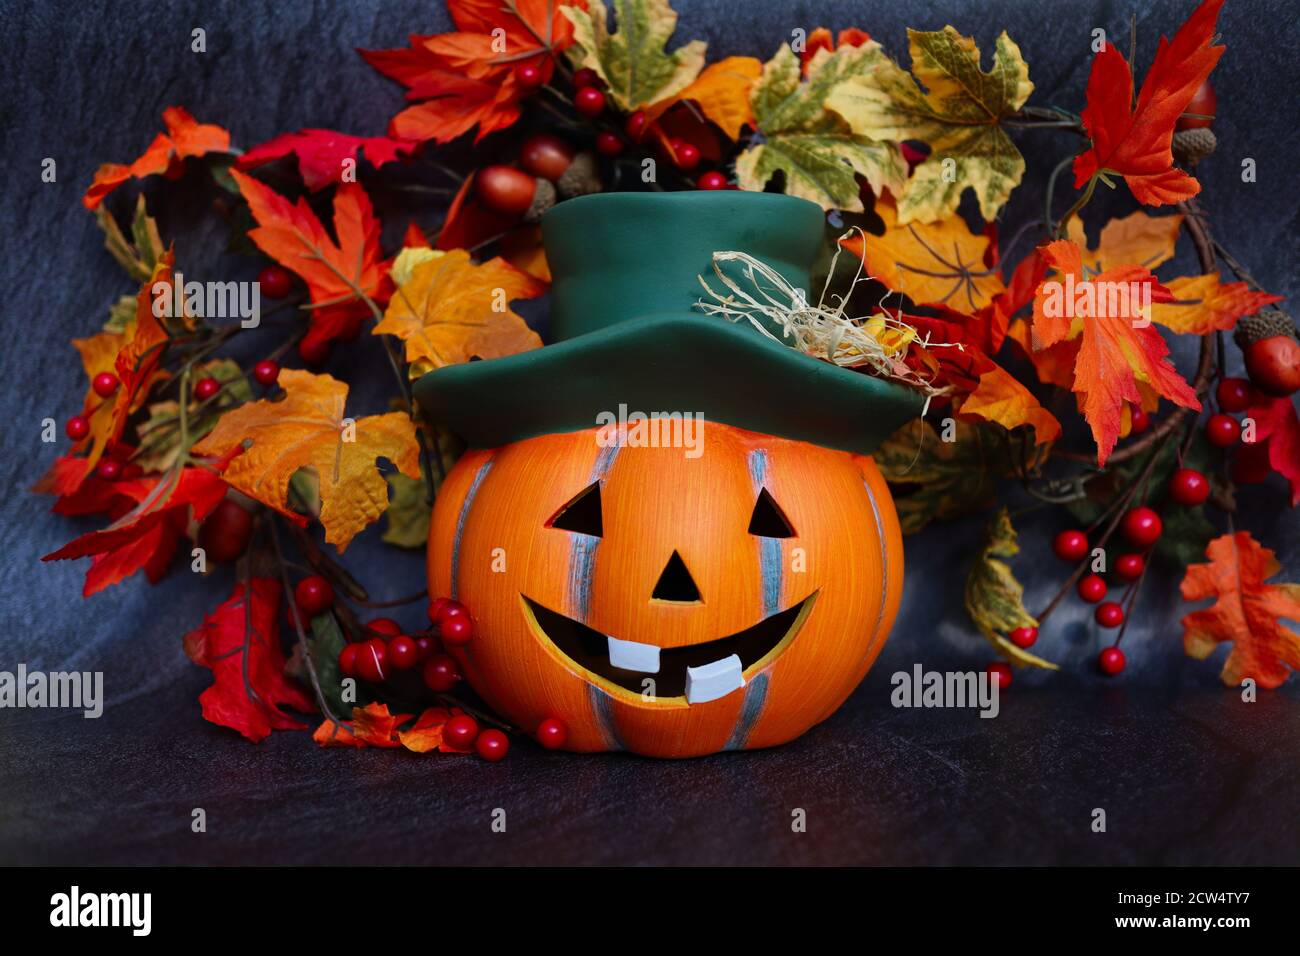 Artificial Orange Halloween Pumpkin with Green Hat. Artificial Autumn Leaves. Halloween and Fall Vibes. Stock Photo